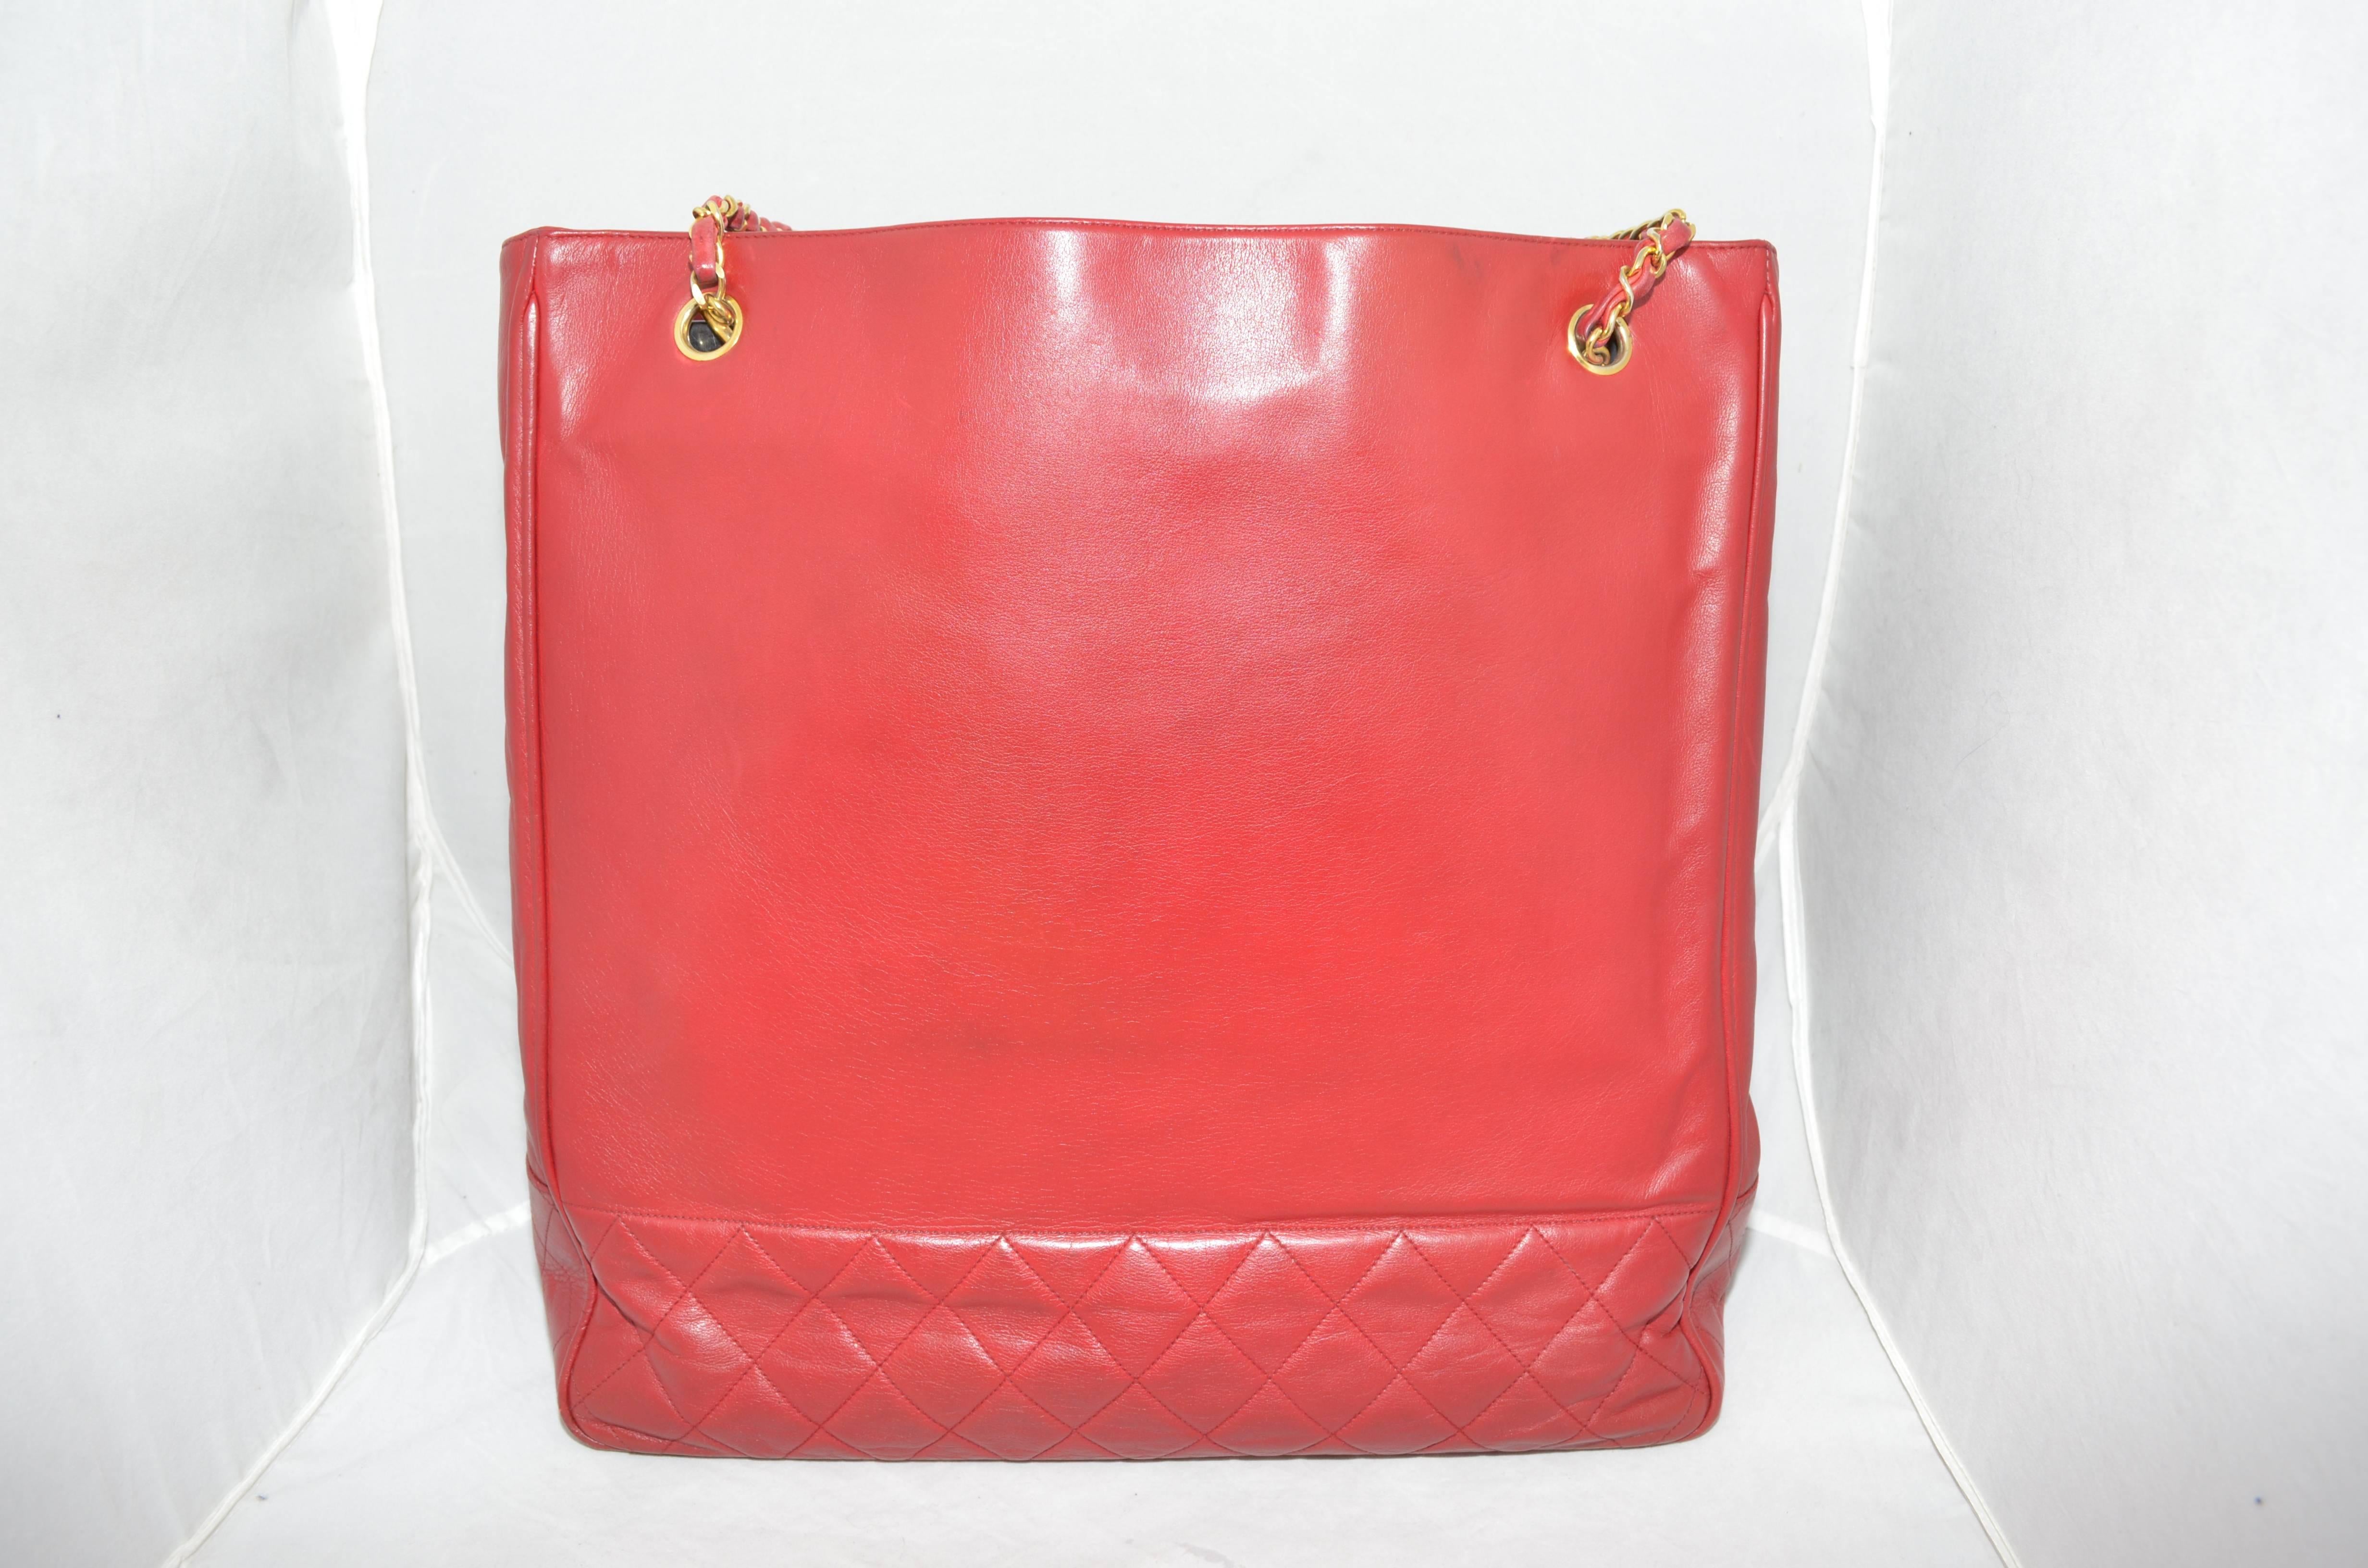 Chanel Red Leather 1986-1988 Vintage Tote Shopper Bag

Chanel vintage tote circa 1986-1988 in red leather with gold-tone chain and interwoven leather shoulder straps, CC leather charm tag on strap, and a quilted trim along the bottom sides. Fully